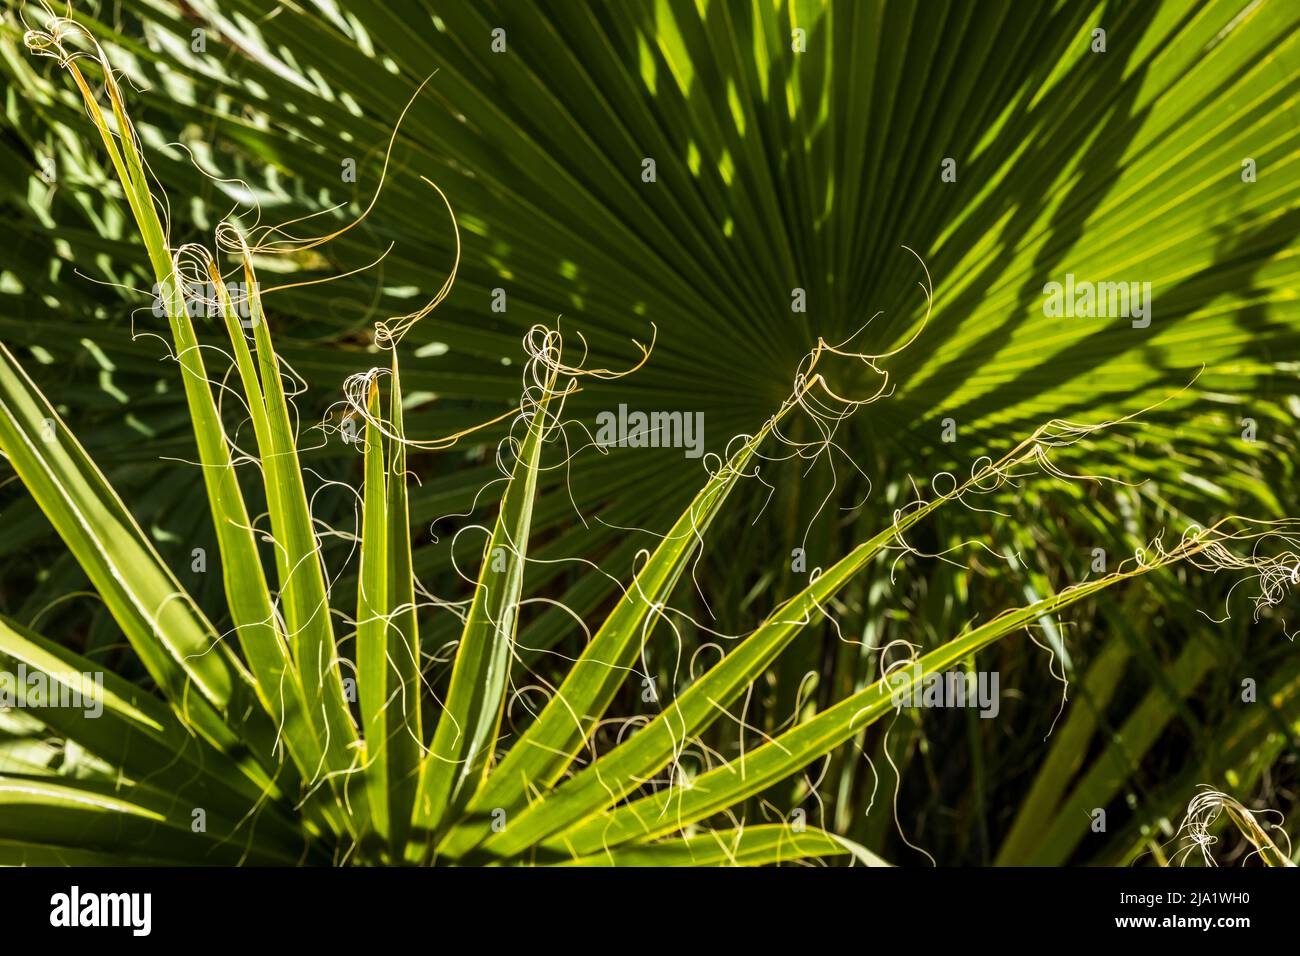 Closeup view of a Fan Palm tree where the delicate ends of the fronds get whipped into strings by the winds. Stock Photo